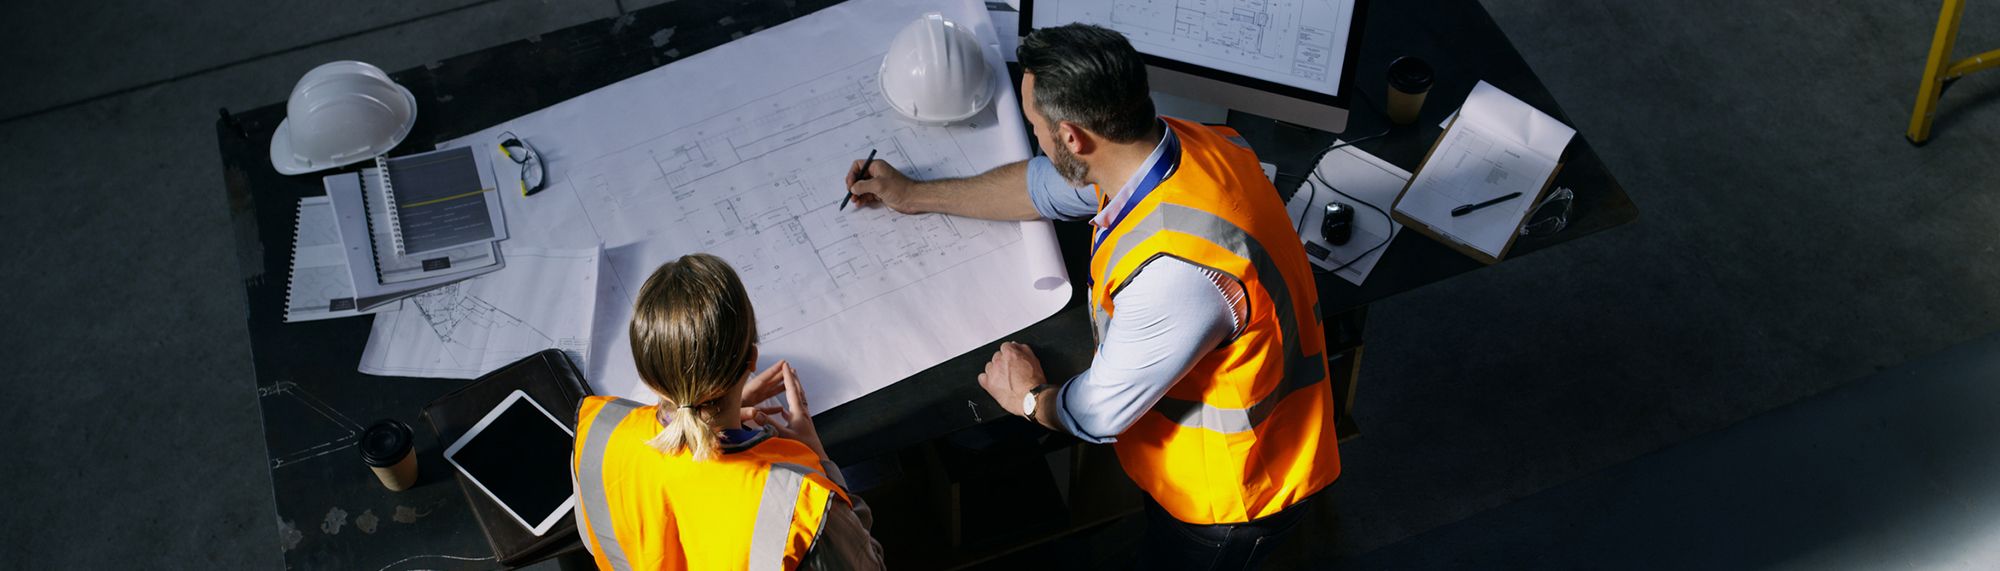 Construction planning and materials management | IAPM